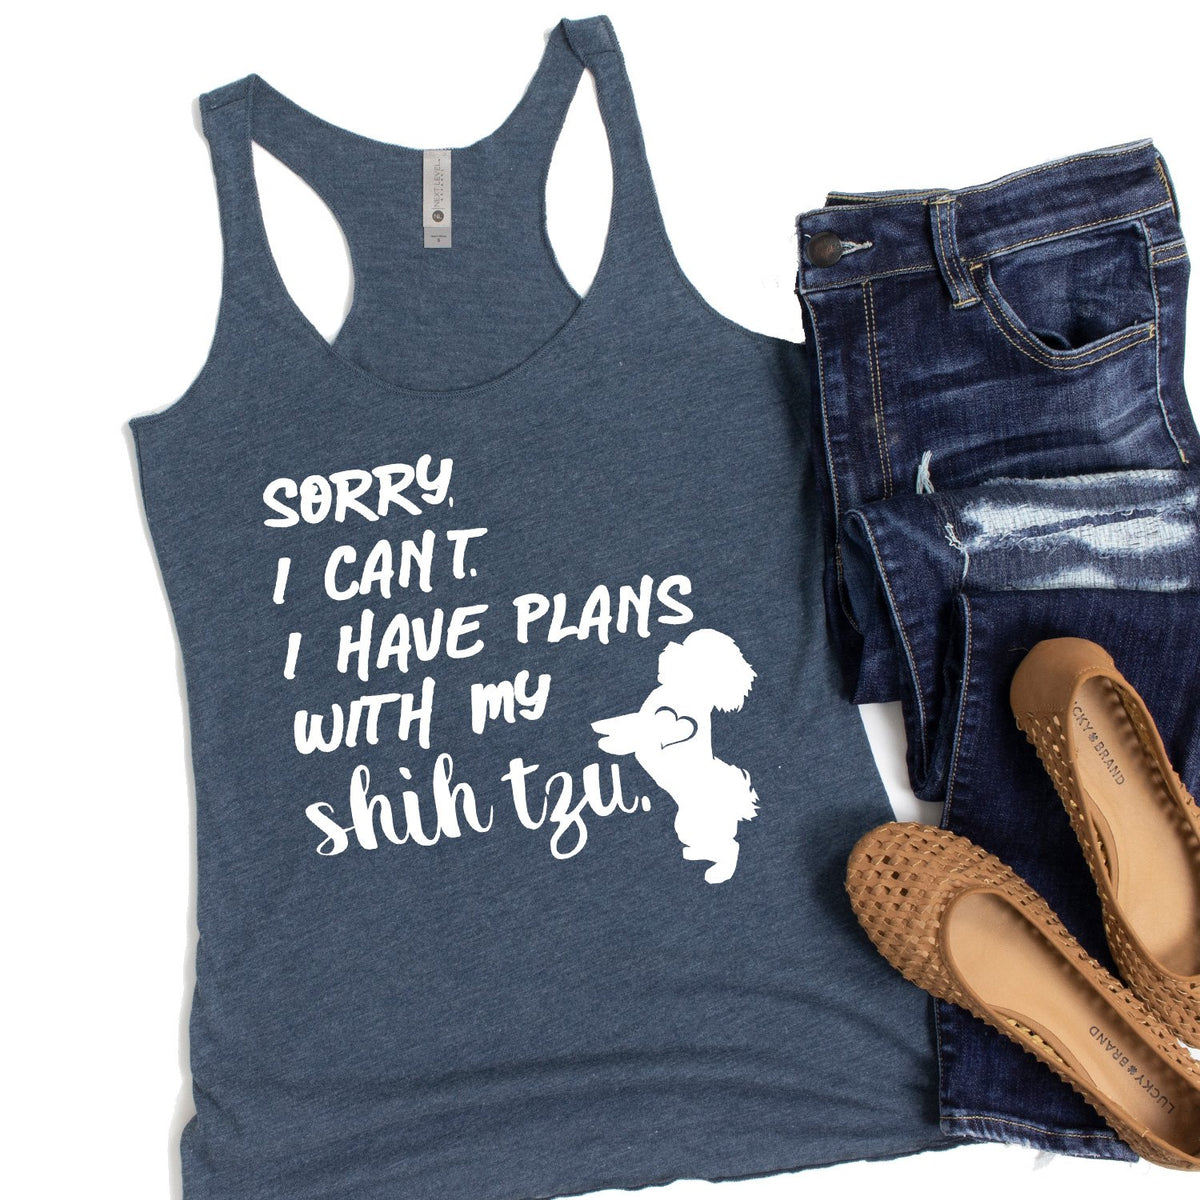 Sorry I Can&#39;t I Have Plans with My Shih Tzu - Tank Top Racerback